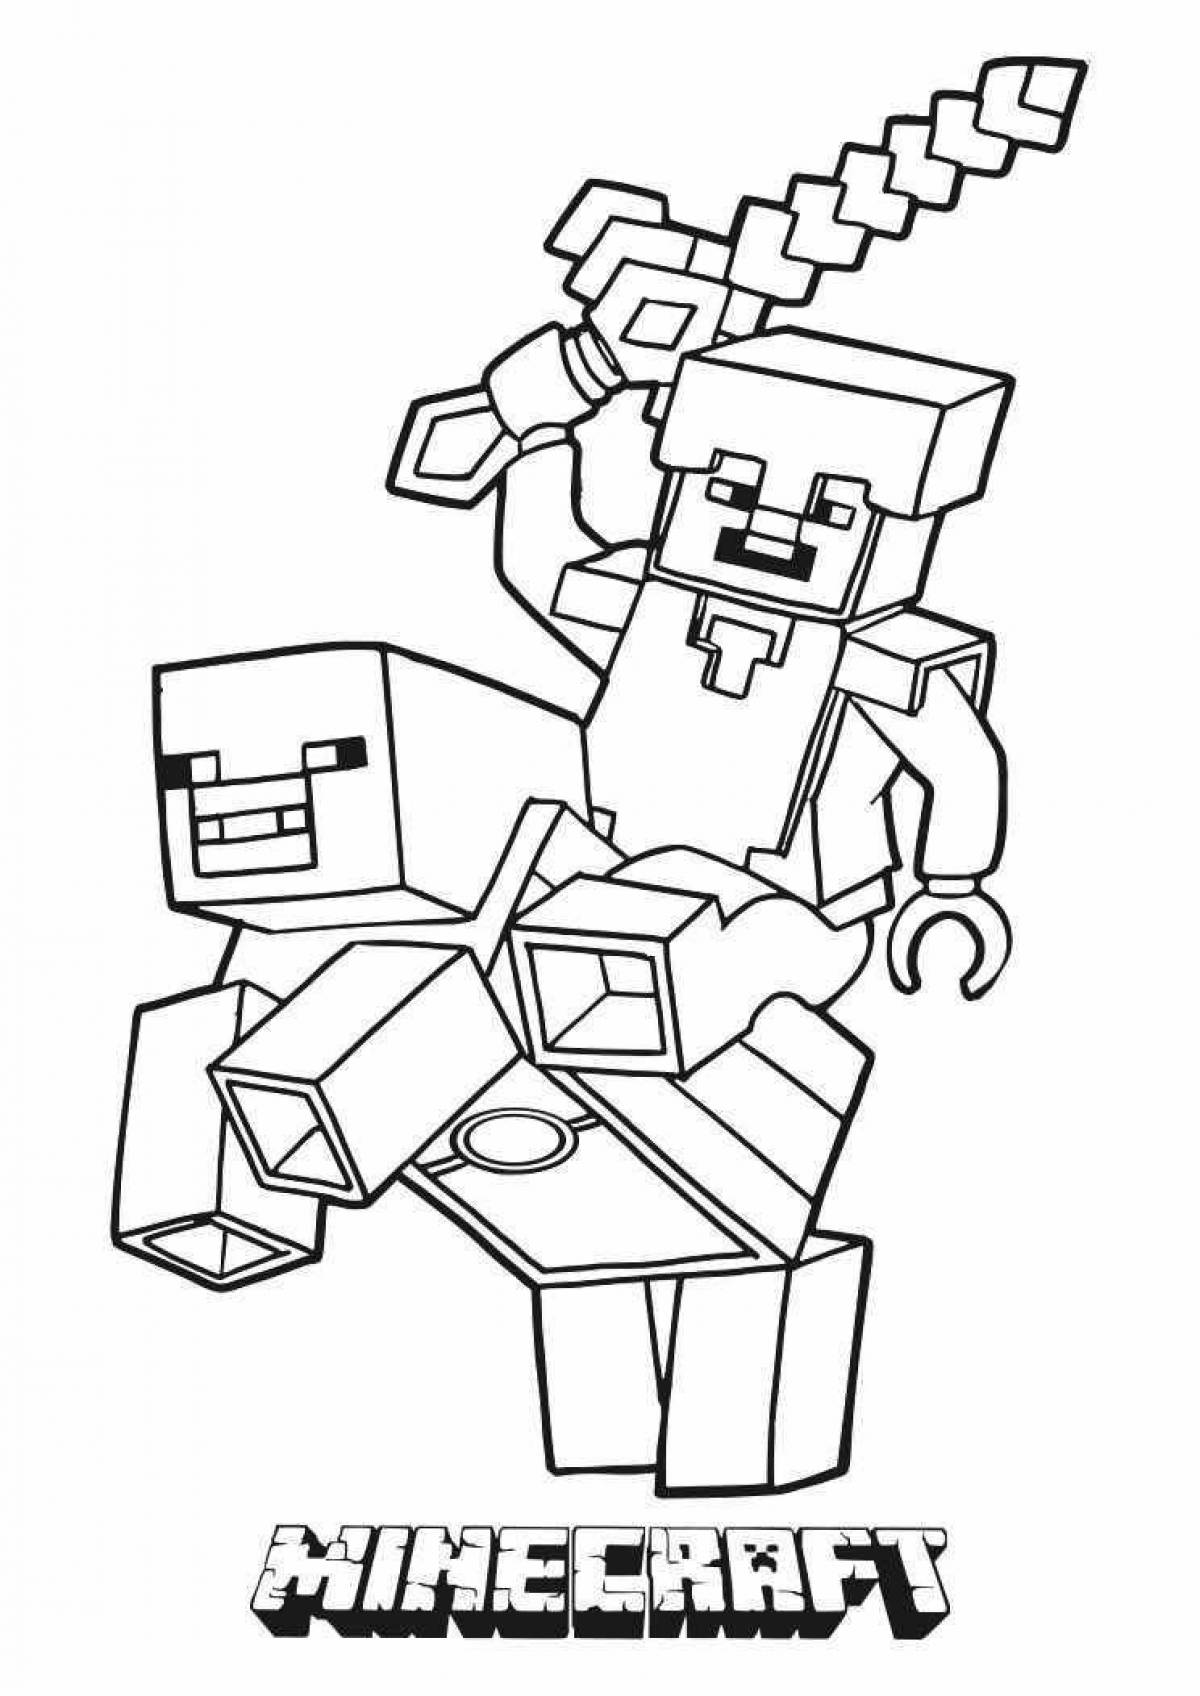 Minecraft awesome heroes coloring page